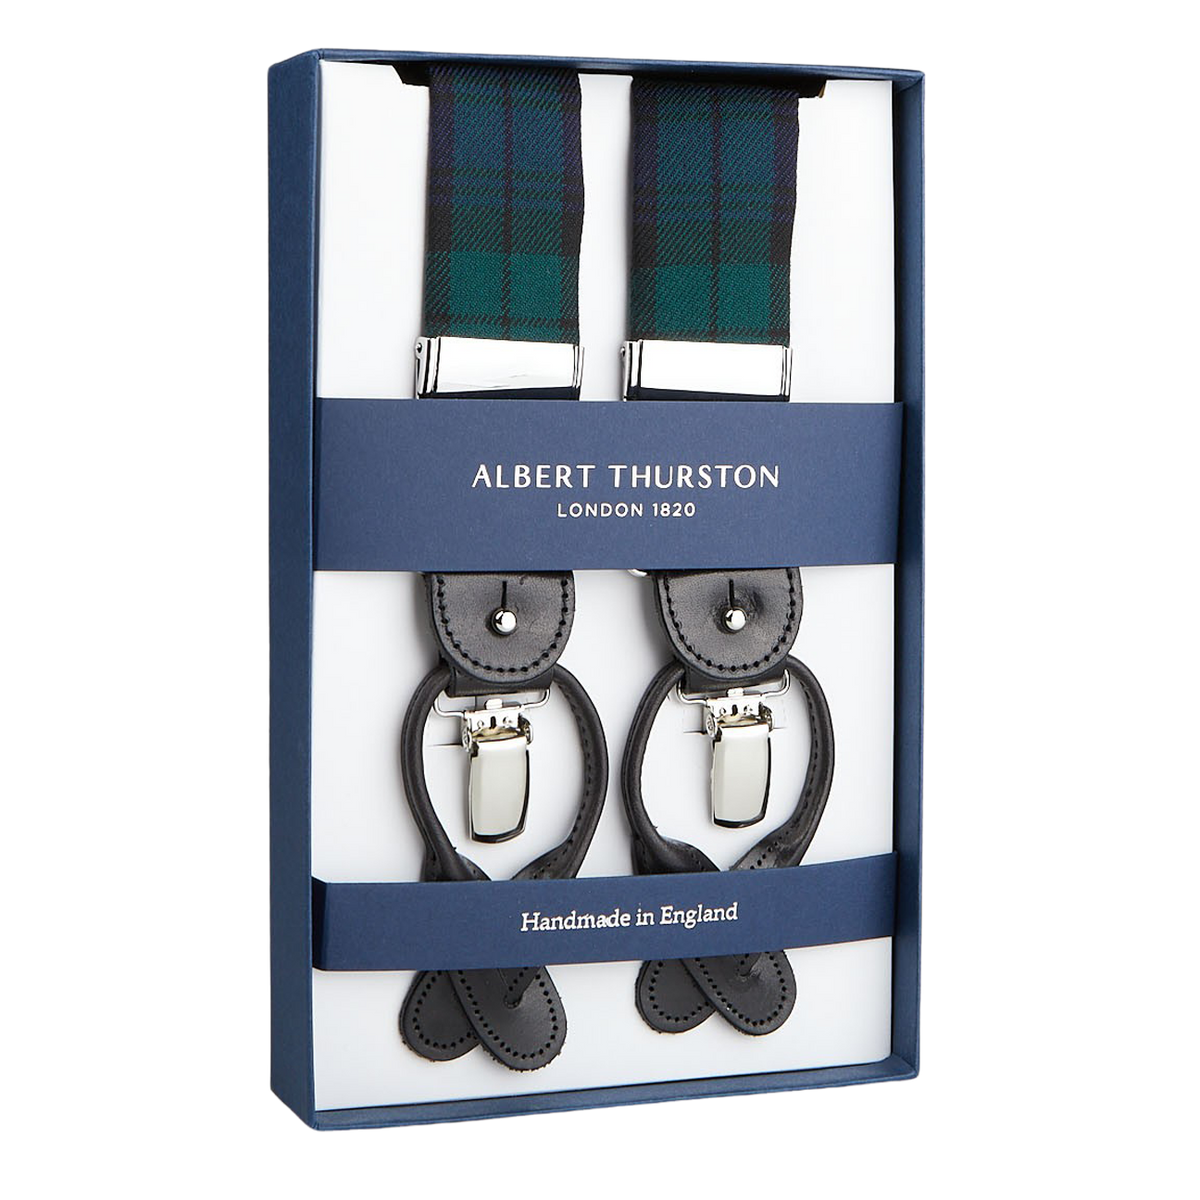 A boxed pair of Albert Thurston Navy Green Wool Black Watch 35 mm braces with leather fittings, advertised as handmade in England.